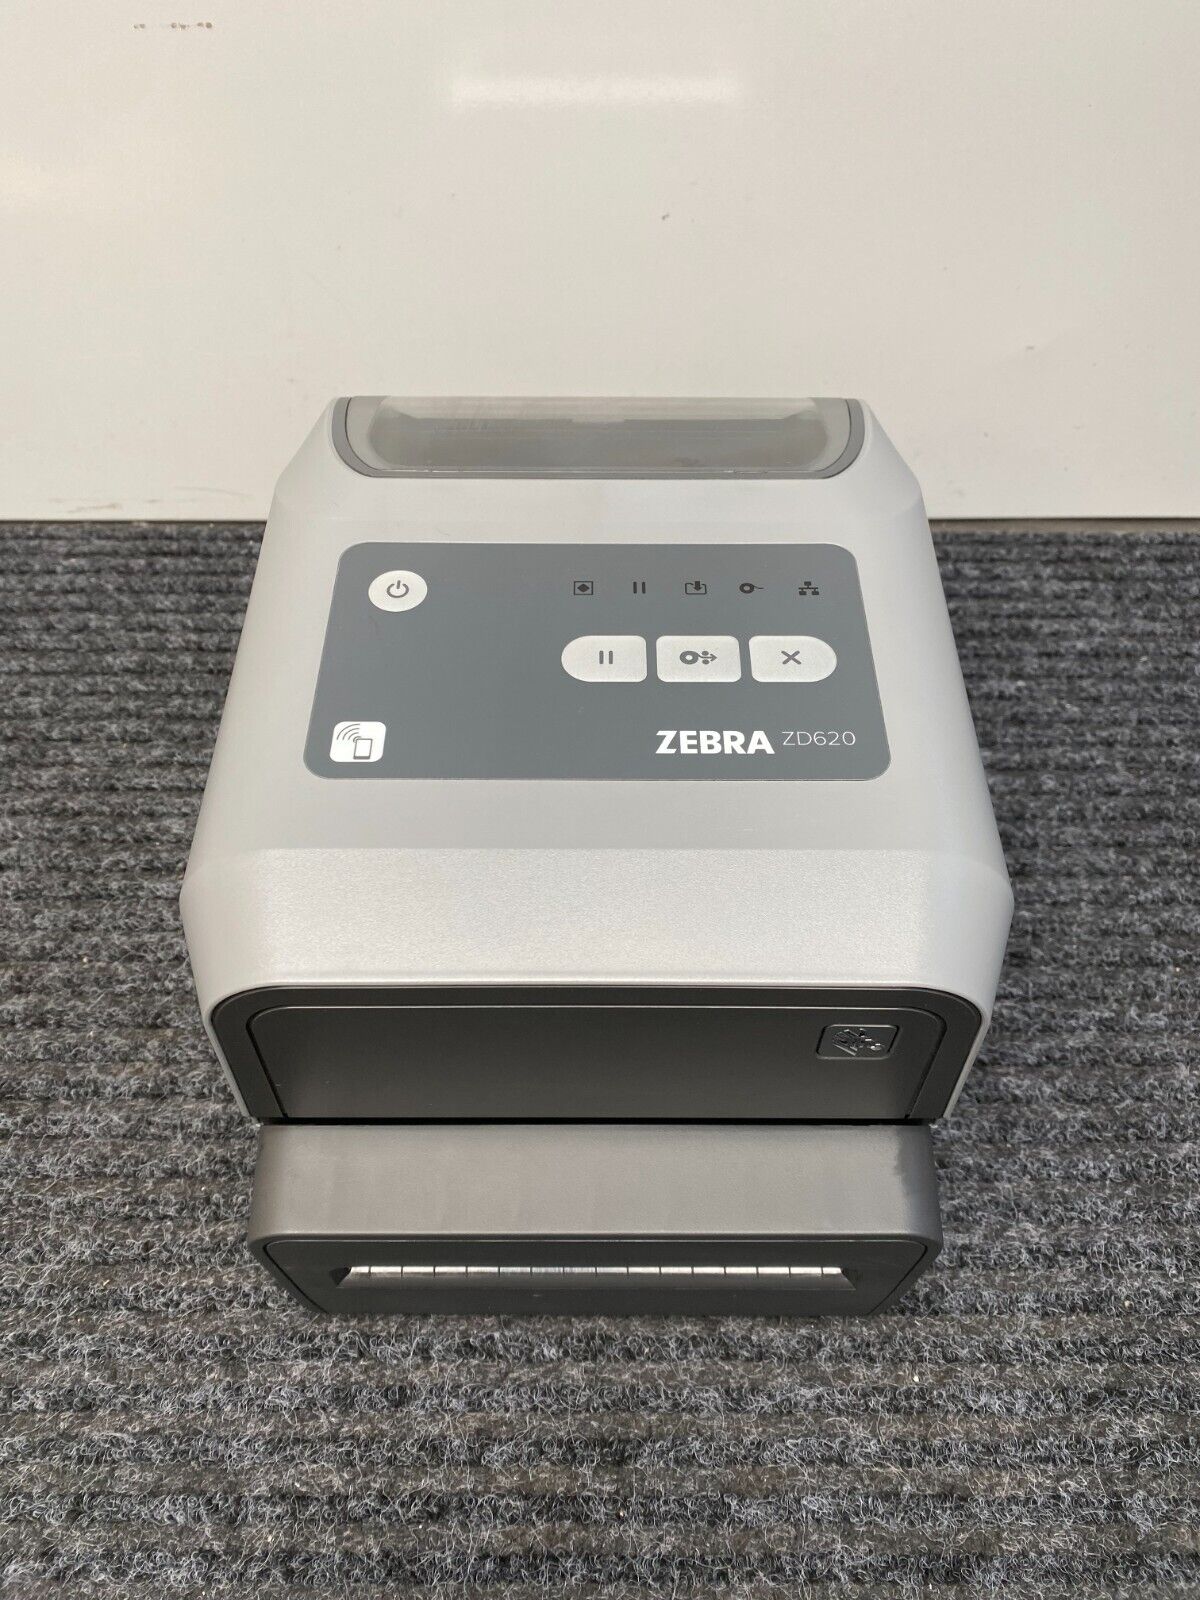 Zebra ZD620d Direct Thermal Label Printer - Tested Working